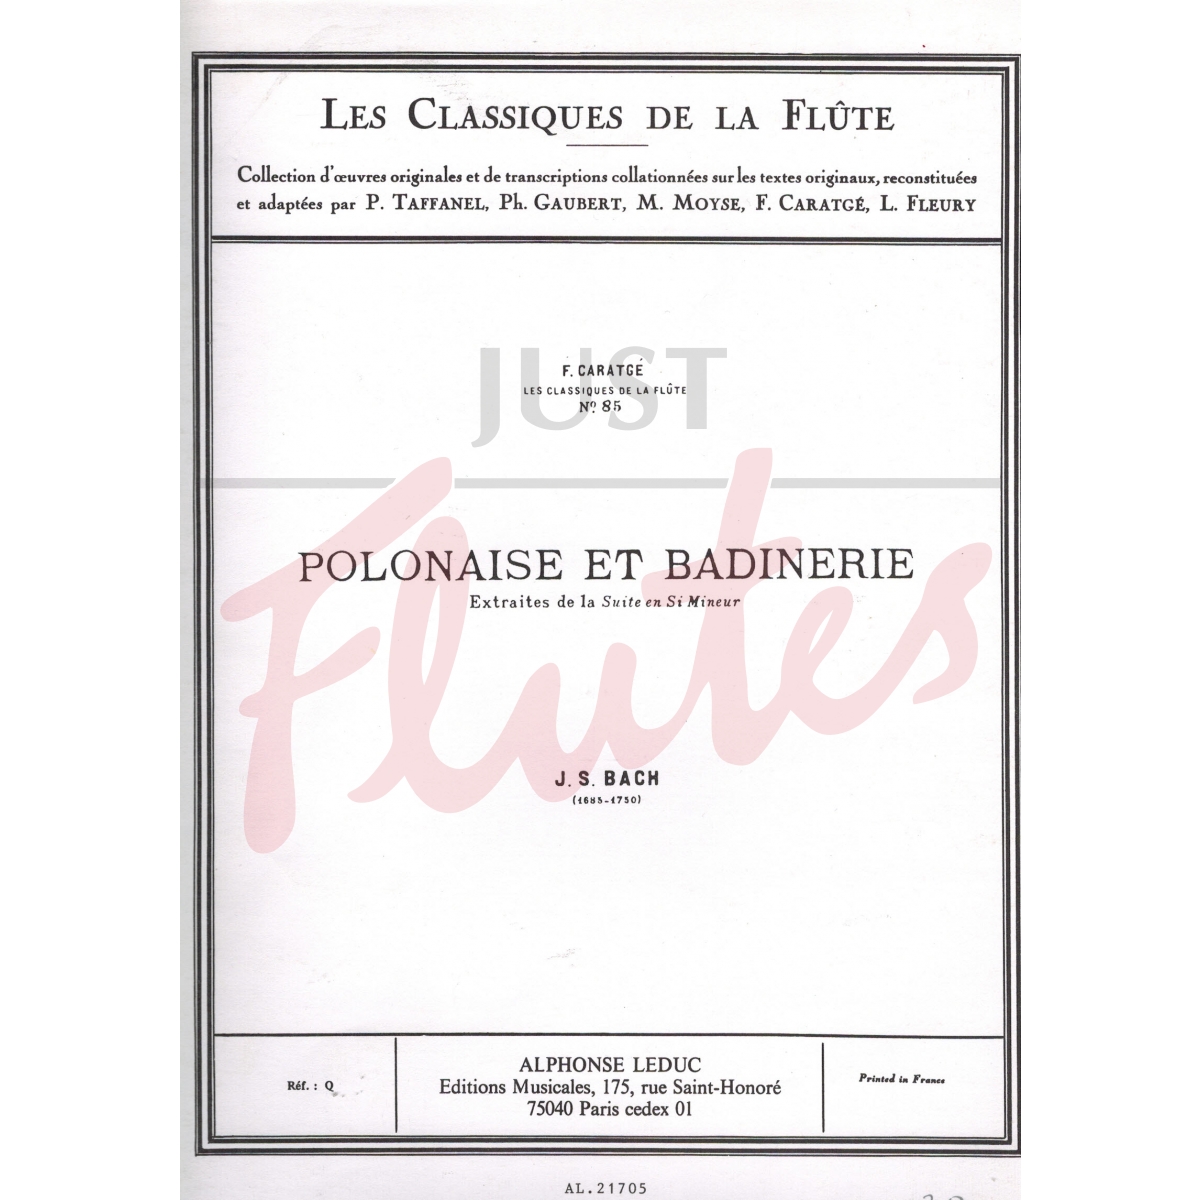 Suite No 2 in B minor - Polonaise and Badinerie